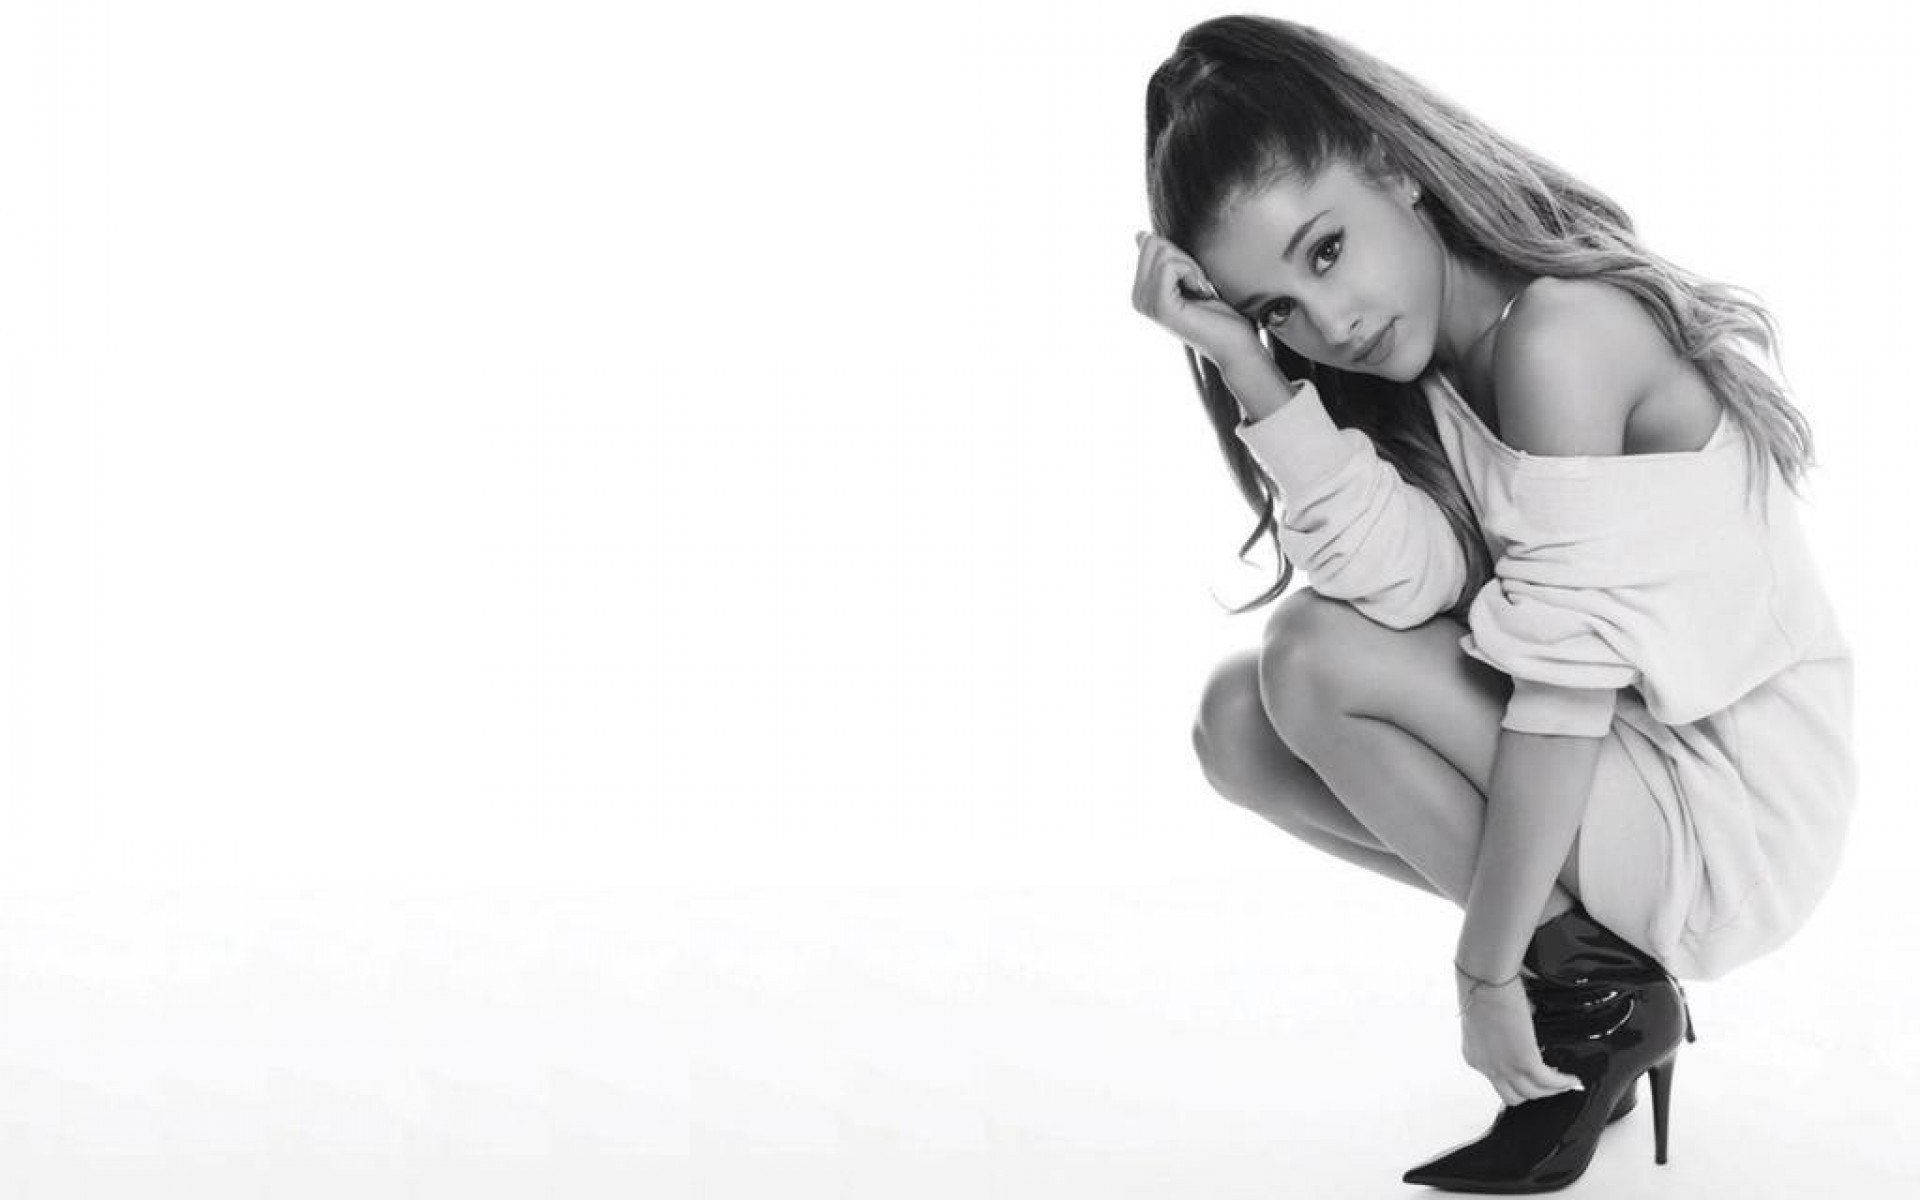 Ariana Grande posing with style Wallpaper